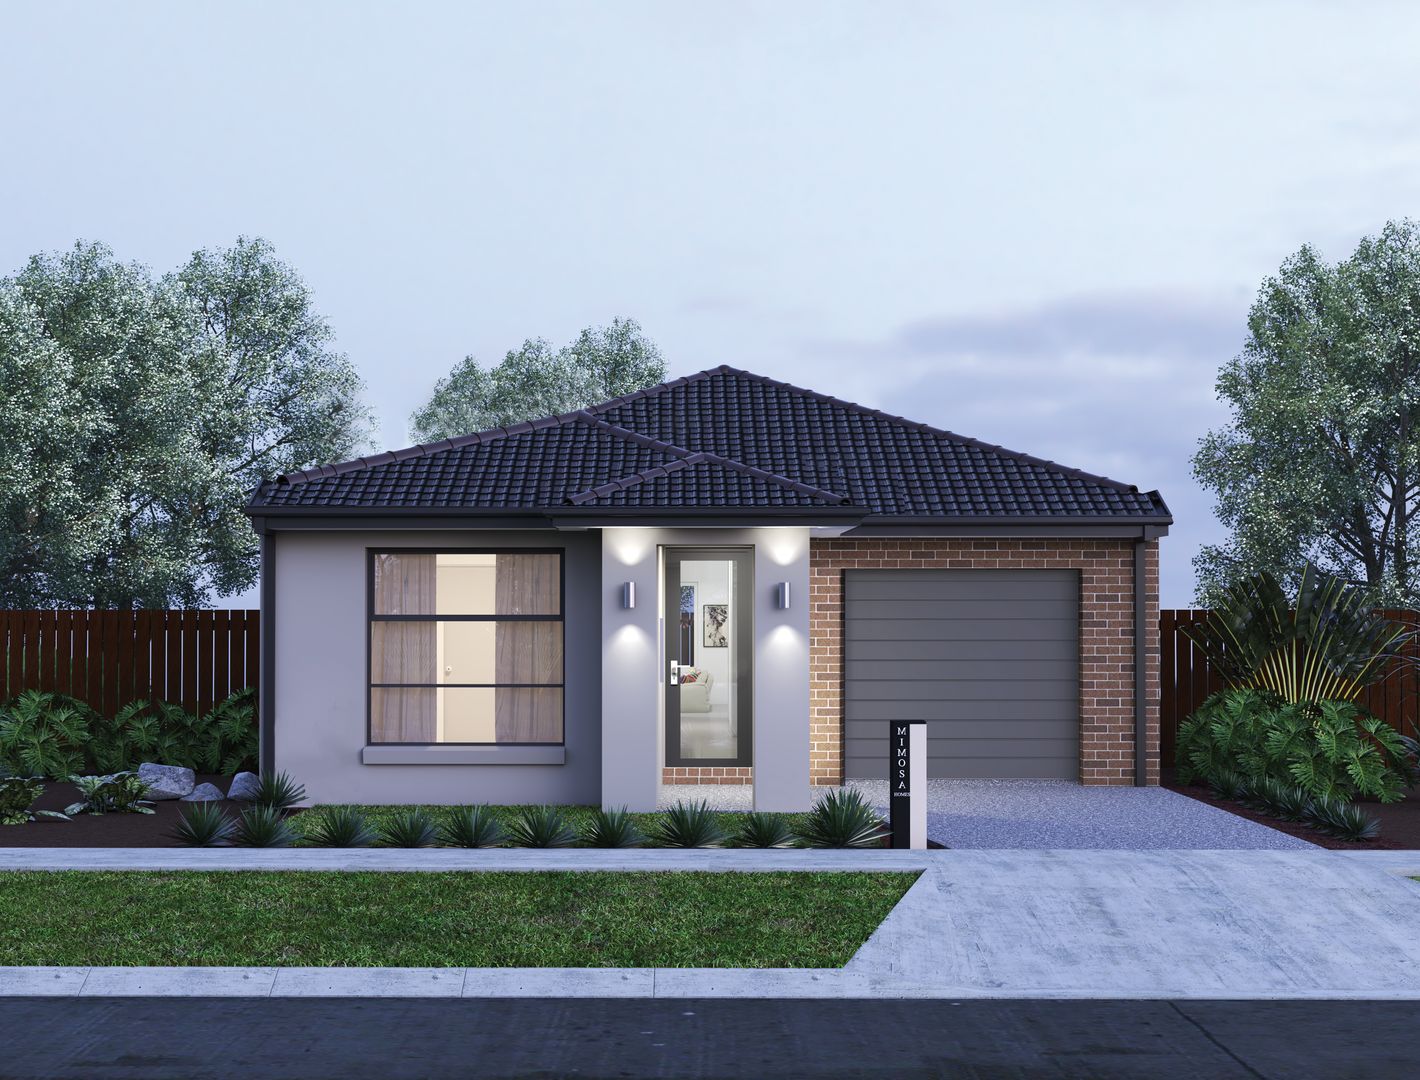 3 bedrooms New House & Land in 511 (ROSEWOOD ESTATE) DEANSIDE VIC, 3336